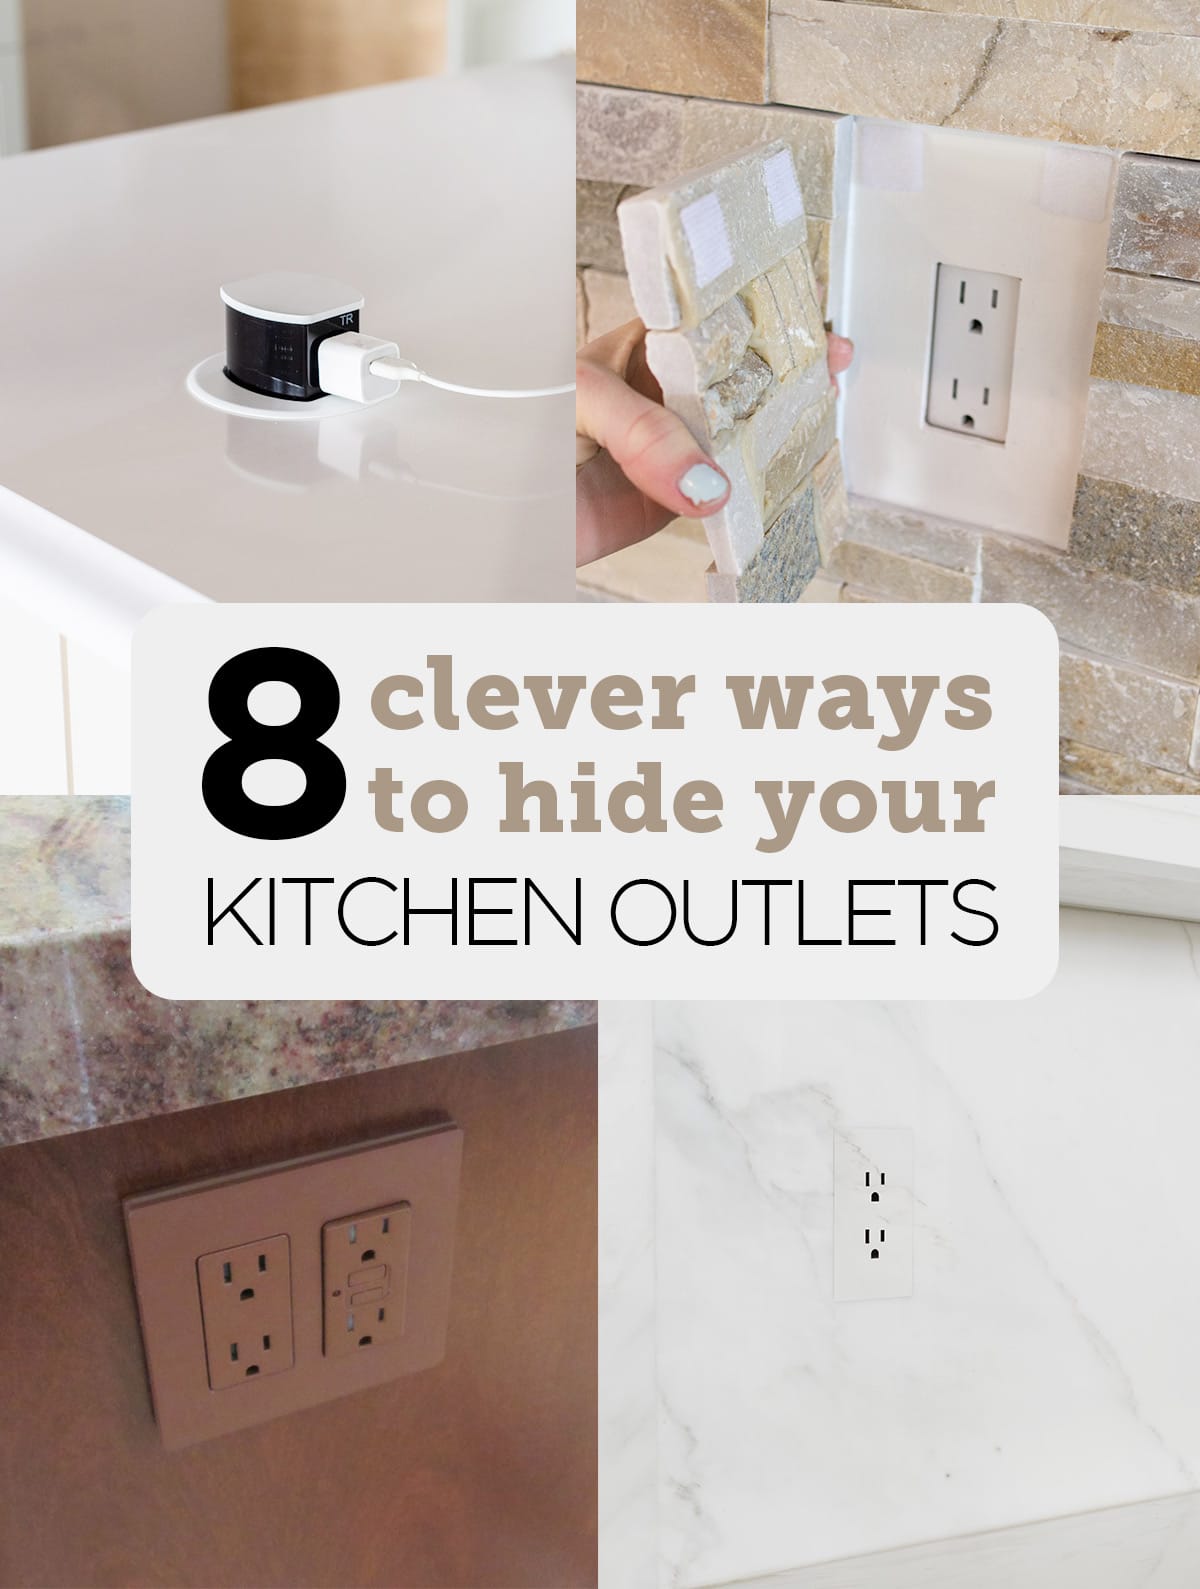 Top 10 Ways to Hide Wires in Your Home: Here's How.